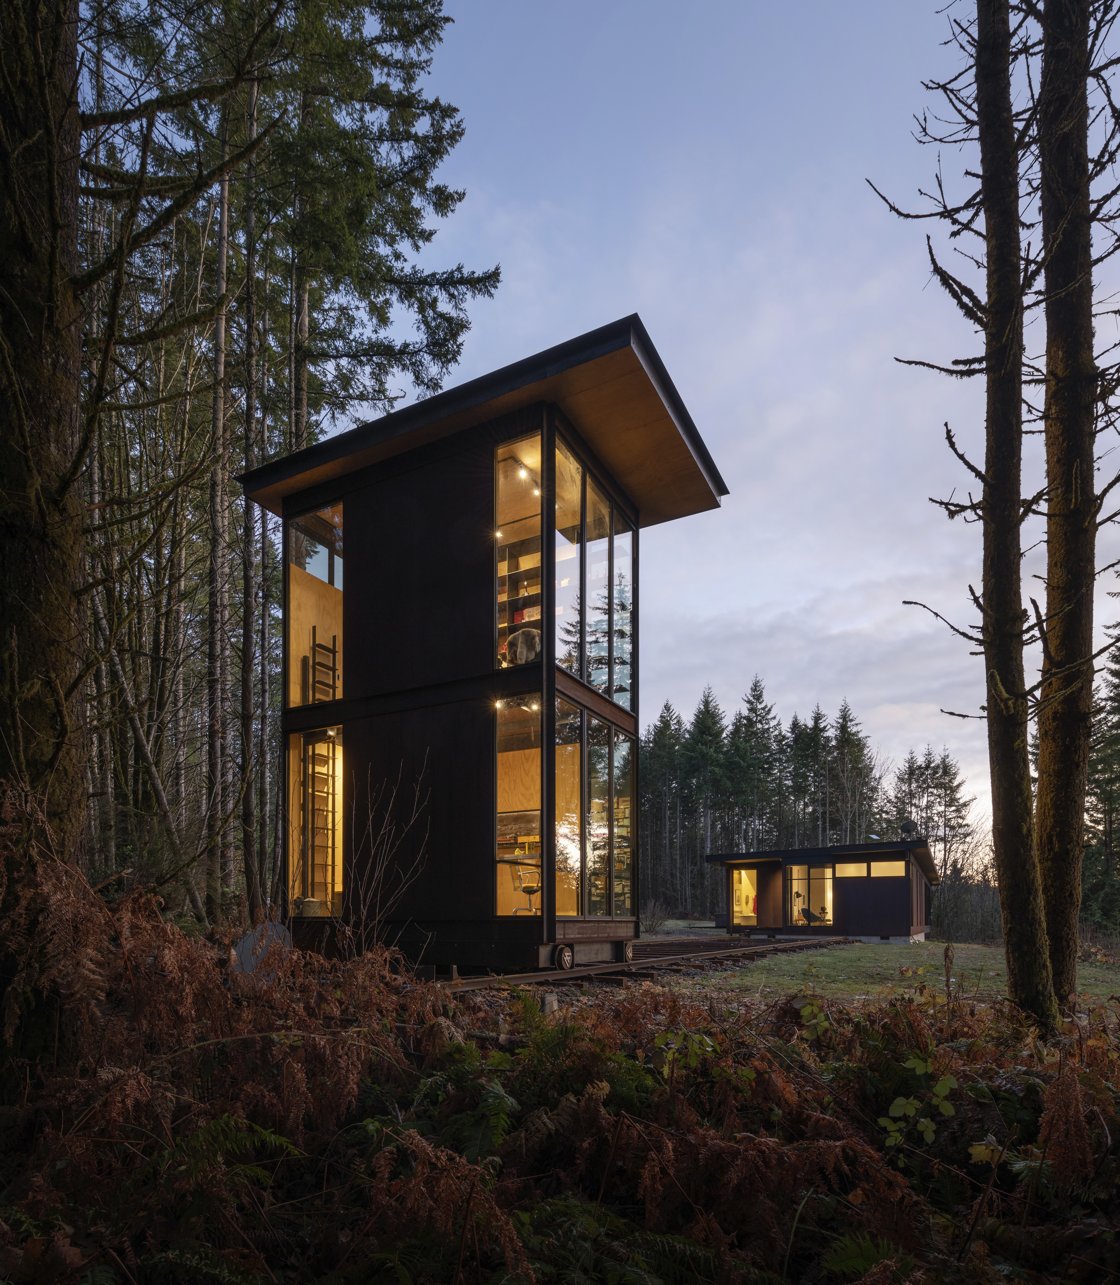 Innovative Architecture: Olson Kundig and the Ingenuity of Moving Parts